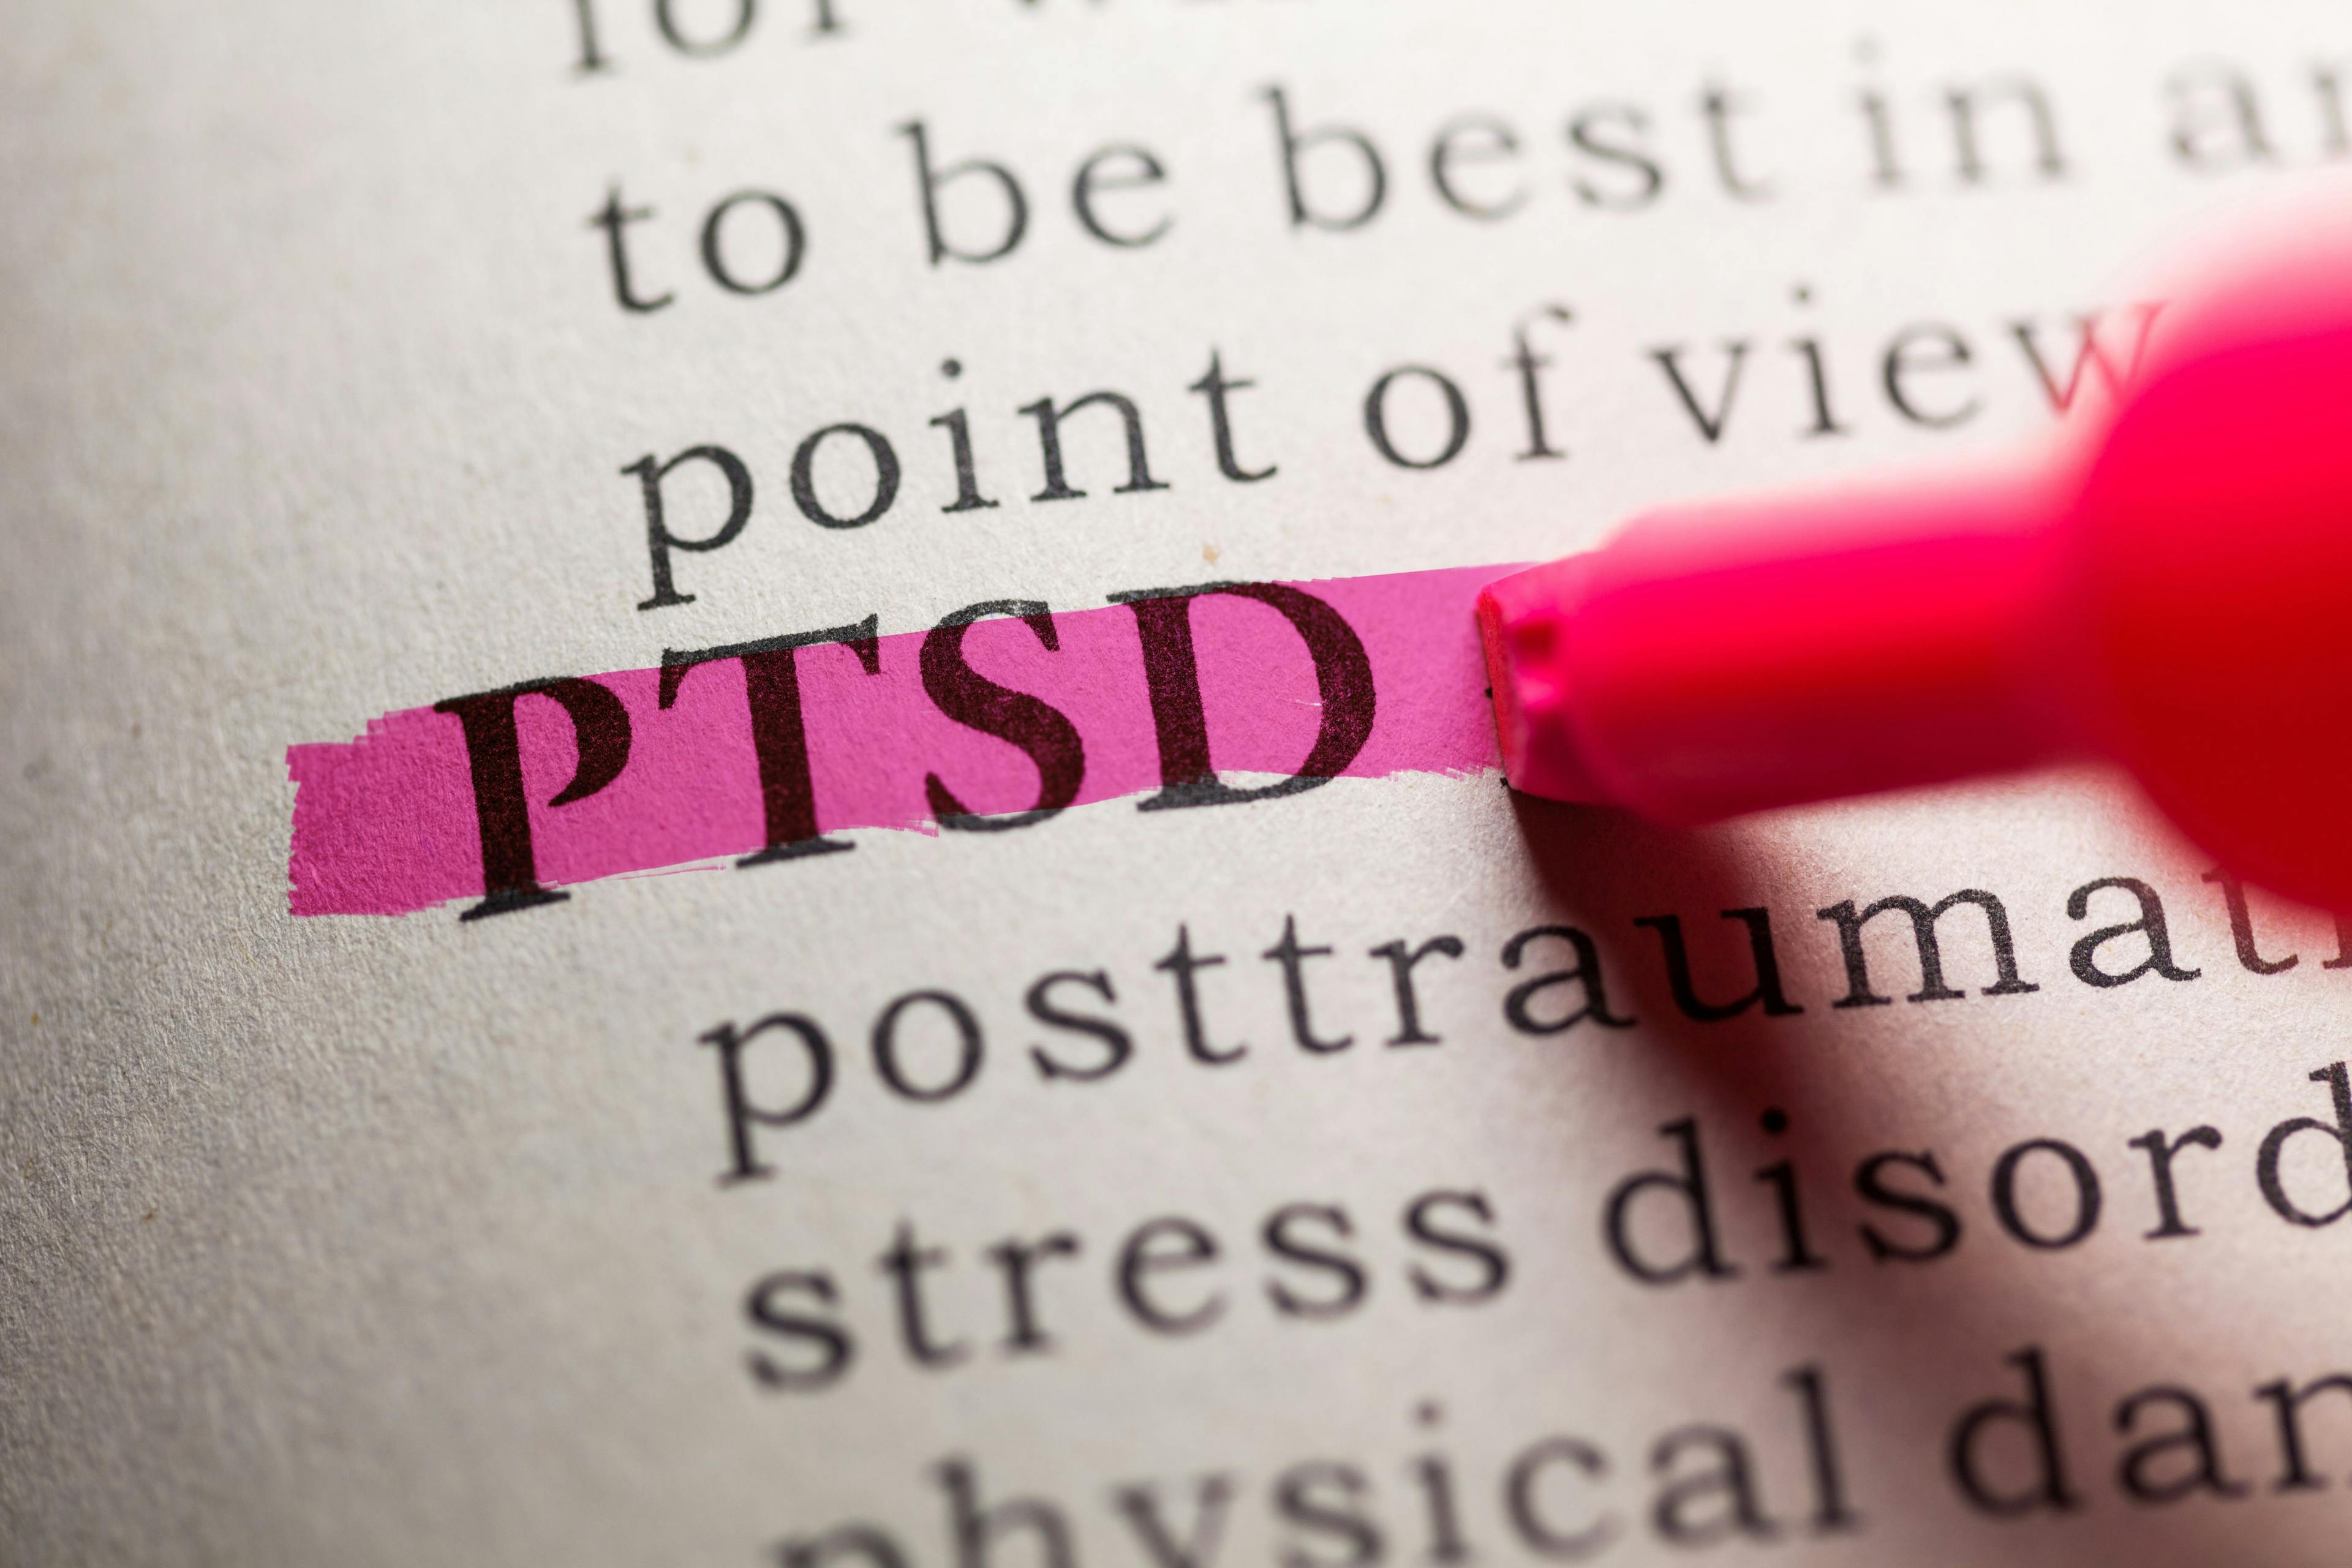 The therapy is the first self-neuromodulation device for PTSD approved by the US Food and Drug Administration.